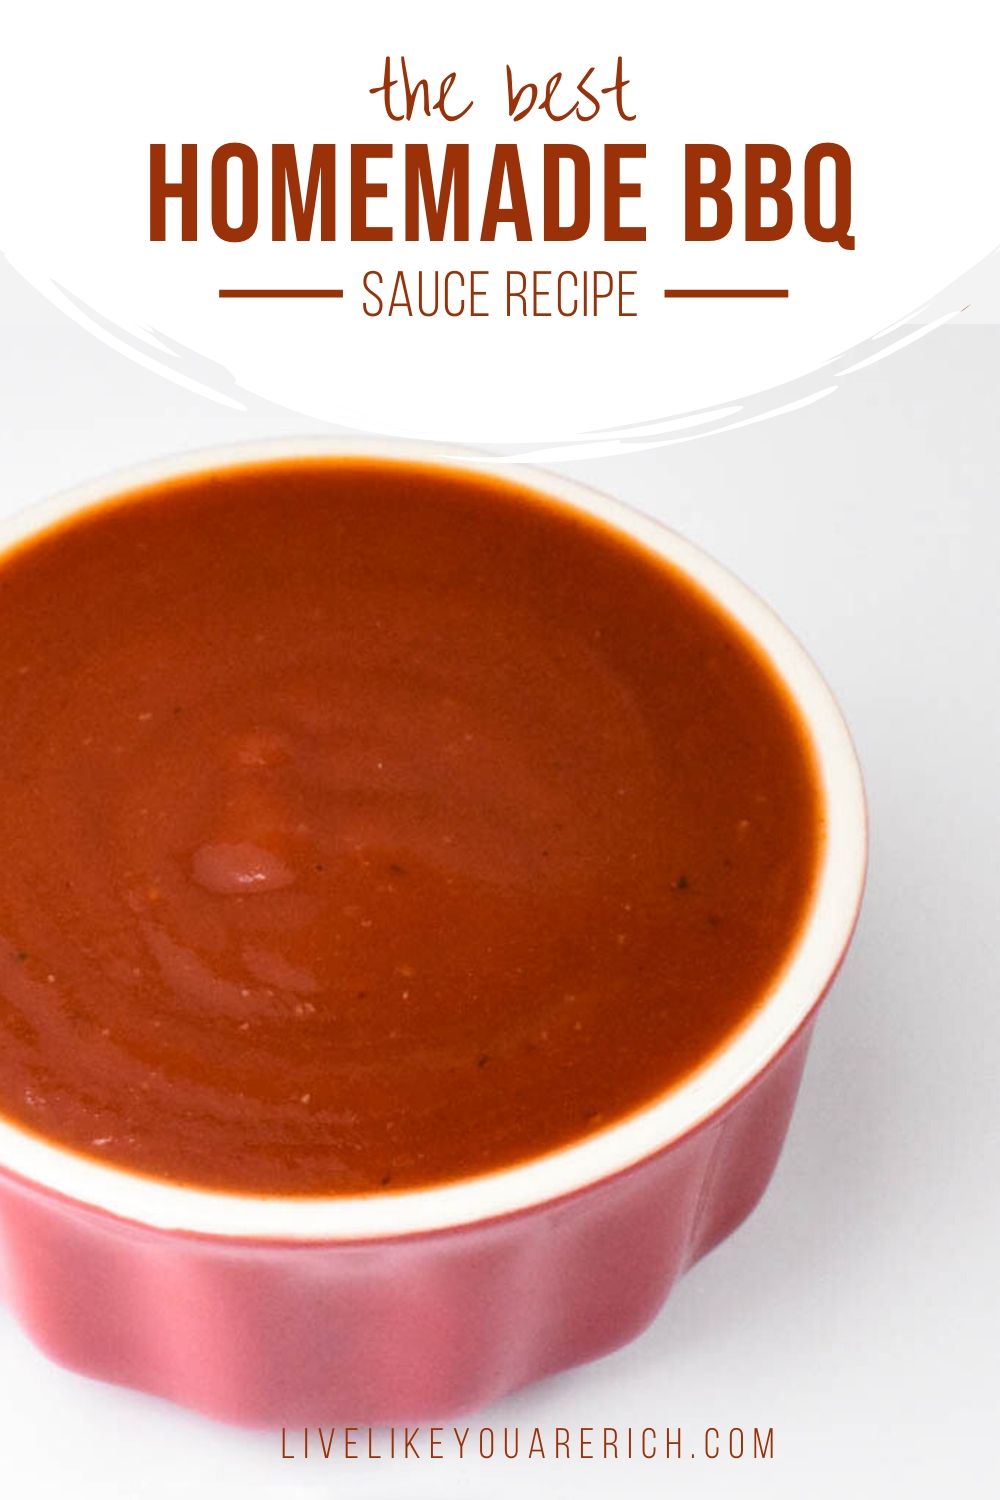 If you have never tried homemade BBQ sauce you NEED to—especially this recipe! It tastes way better than the store-bought varieties. It is so fresh and the flavors balance each other out amazingly well. There is a little bit of sweet, salty, mild spice, and smoke, which together form the BEST homemade BBQ sauce ever.